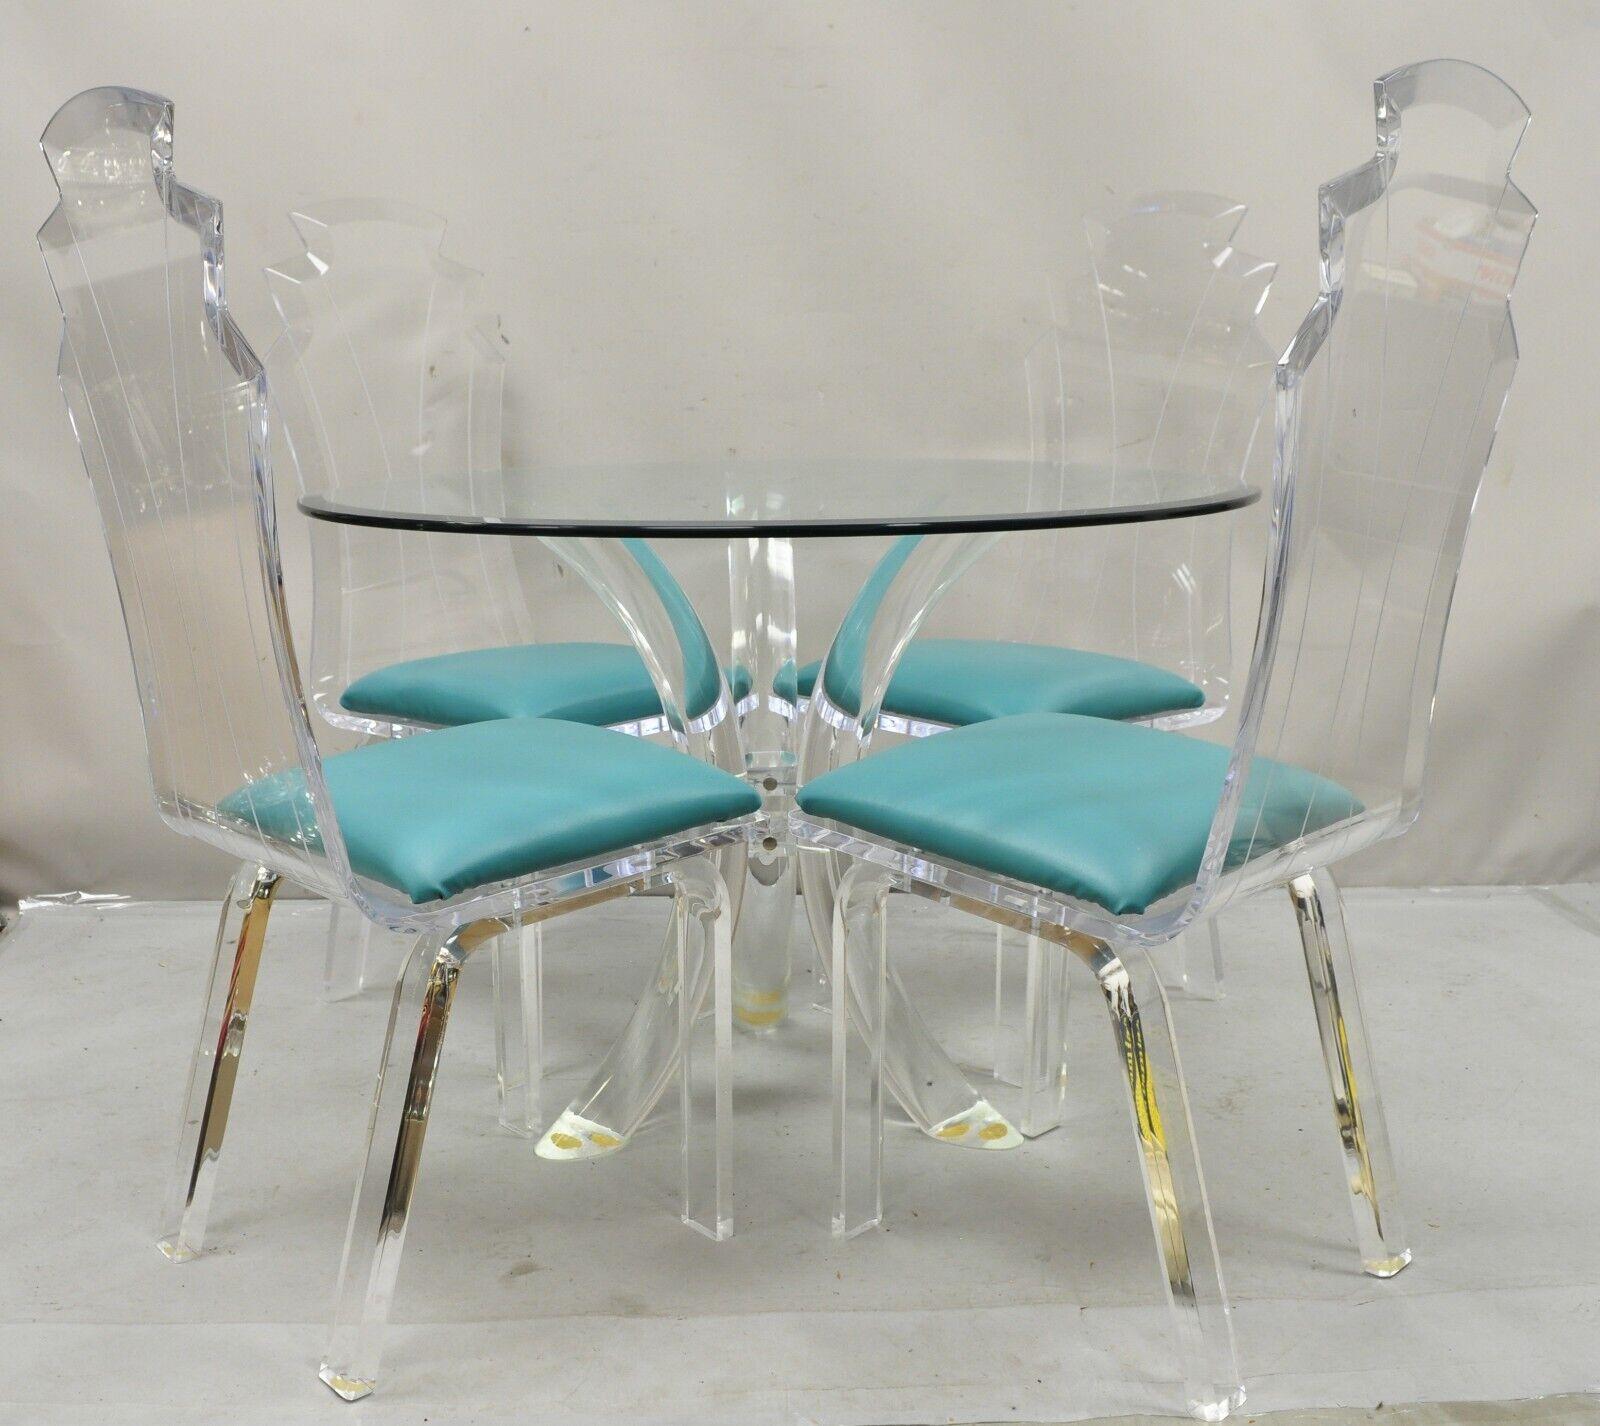 Vintage Lucite Acrylic Mid Century Sculptural Dining Table & 4 Chairs - 5 Pc Set For Sale 3